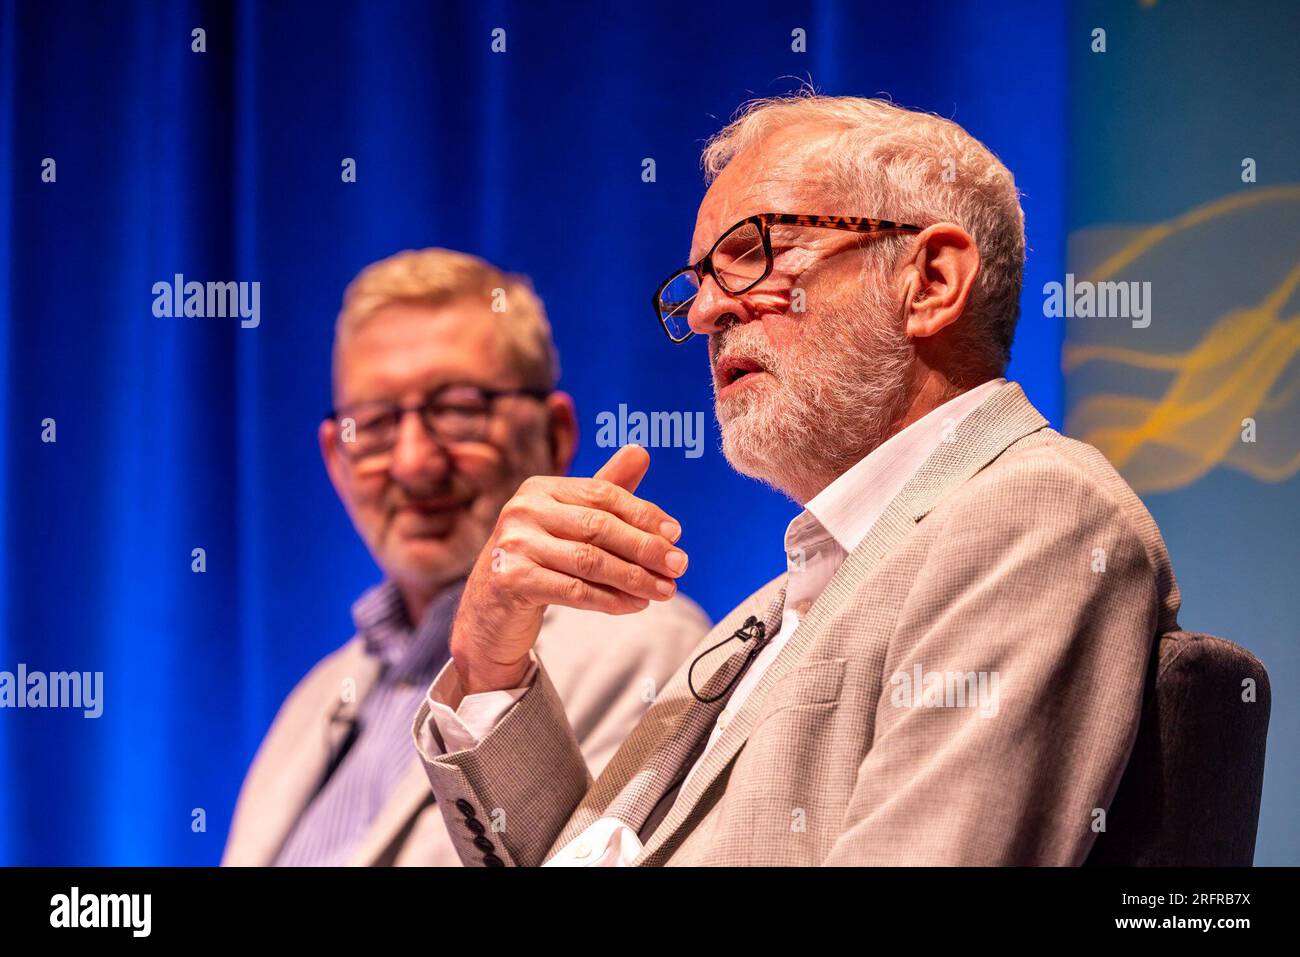 Edinburgh, United Kingdom. 05 August, 2023 Pictured: Len McCluskey and Jeremy Corbyn. Former Labour leader Jeremy Corbyn MP and renowned trade unionist Len McCluskey are interviewed by LBC presenter Iain Dale at the Edinburgh Fringe. During the interview McCluskey accused Keir Starmer of reneging on an agreement to retain Corbyn in the Labour Party. Jeremy Corbyn was quizzed if he will stand as an independent candidate in his constituency and responded by saying ‘watch this space’. Credit: Rich Dyson/Alamy Live News Stock Photo